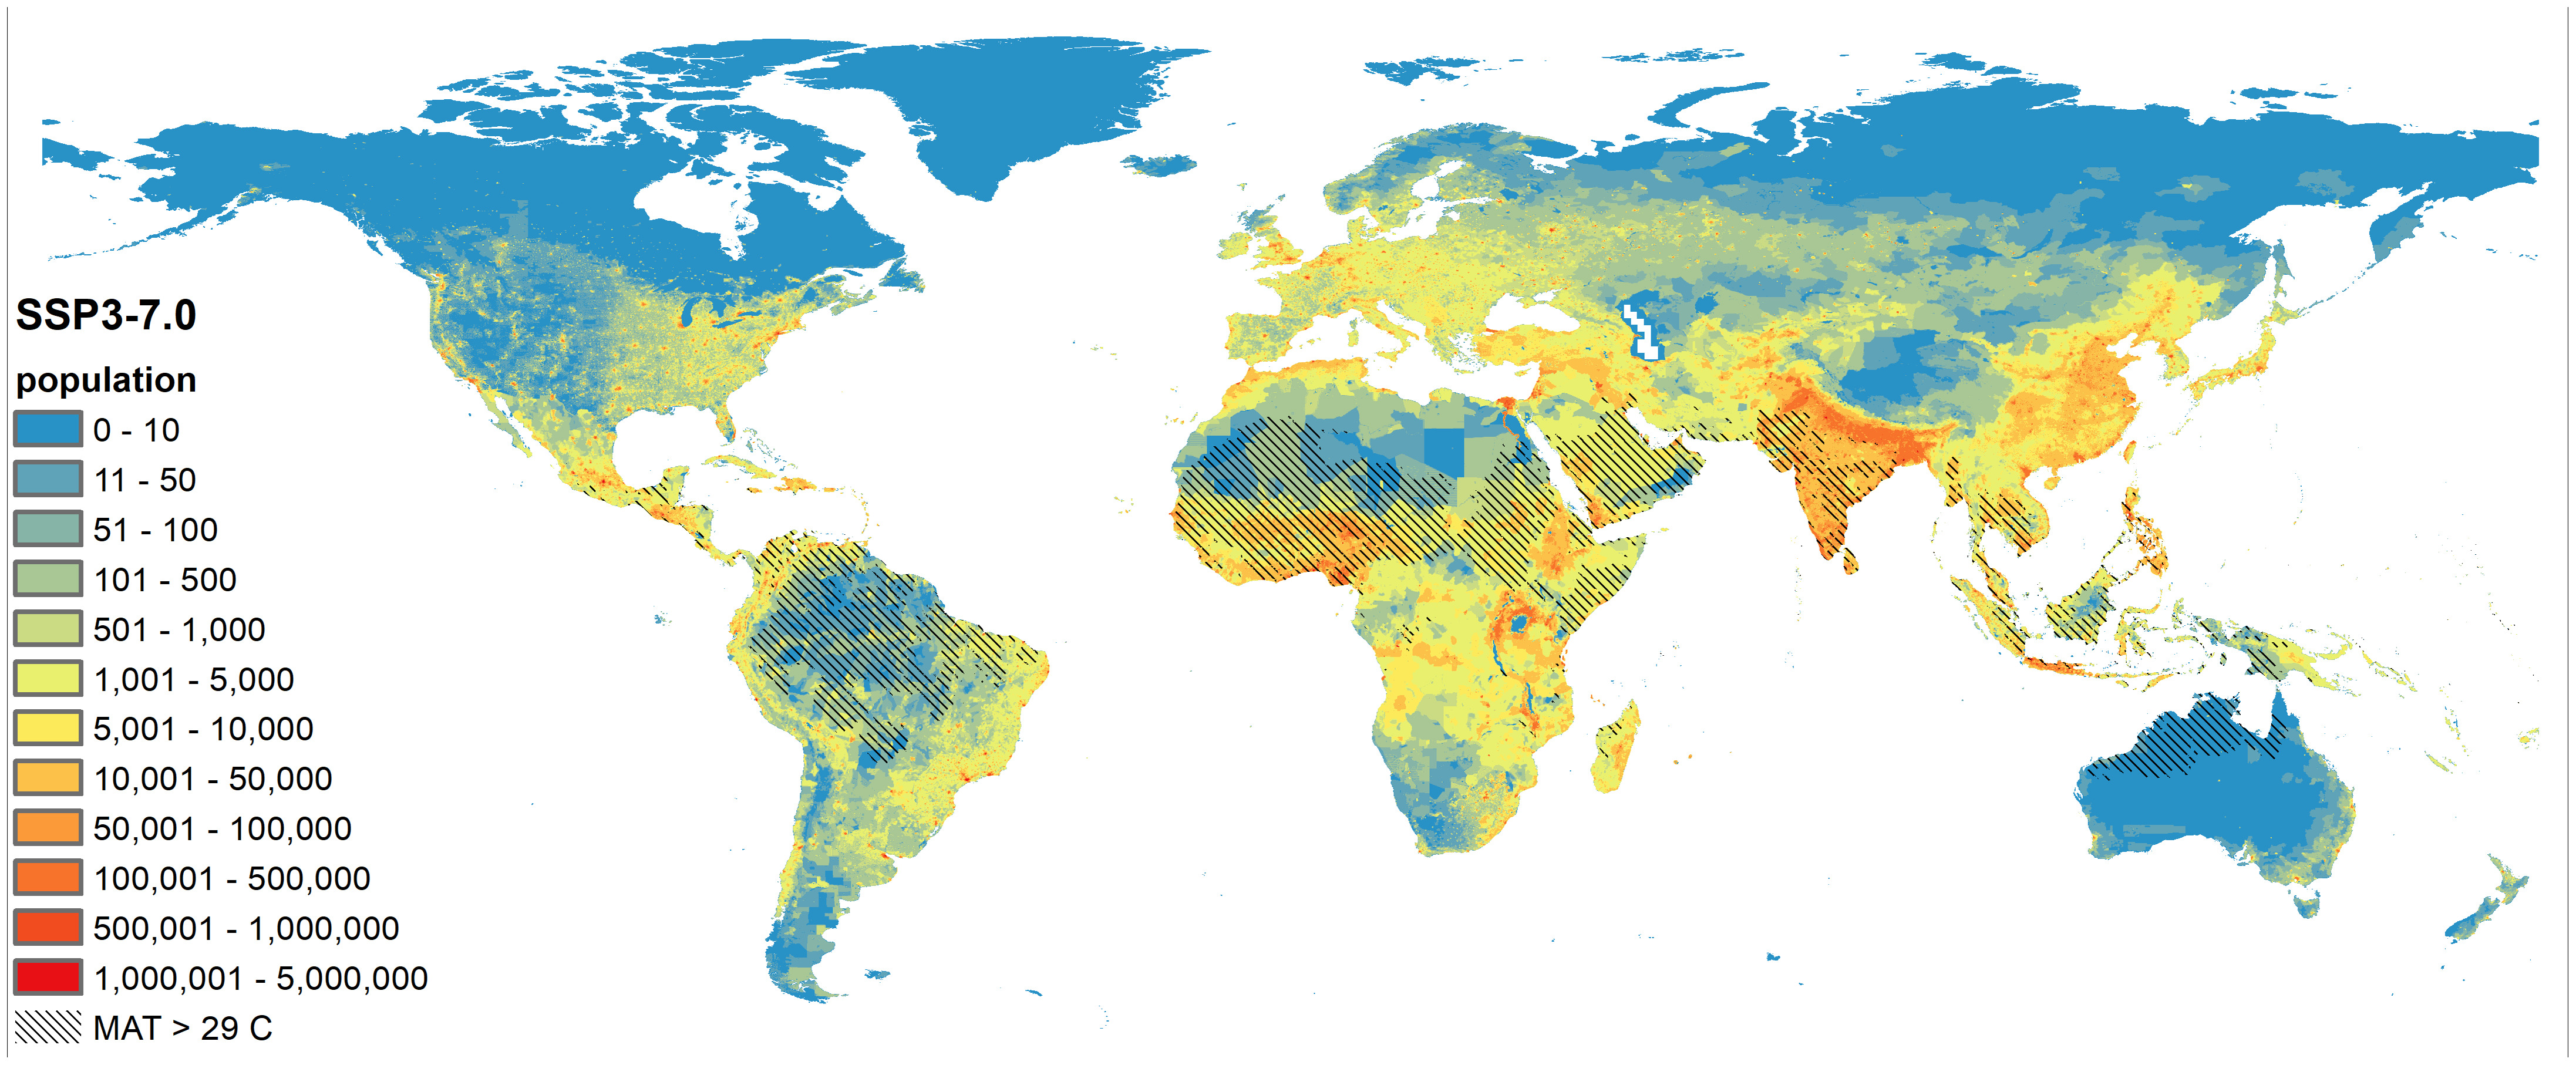 Map showing the overlap between future population distribution and extreme heat. CMIP6 model data from nine GCM models available from the WorldClim database were used to calculate mean annual temperature (MAT) under SSP3-7.0 during around 2070 (2060-2080) alongside Shared SSP3 demographic projections to ∼2070. The shaded areas depict regions where MAT exceeds 29°C, while the colored topography details the spread of population density. This figure shows how projected population density intersects with extreme >29°C MAT (such temperatures are currently restricted to only 0.8 percent of Earth’s land surface area). Using the medium-high scenario of emissions and population growth (SSP3-7.0 emissions, and SSP3 population growth), by 2070, around 2 billion people are expected to live in these extremely hot areas. Currently, only 30 million people live in hot places, primarily in the Sahara Desert and Gulf Coast. The most vulnerable states and communities will continue to be the hardest hit in a warming world, exacerbating inequities. Graphic: Kemp, et al., 2022 / PNAS